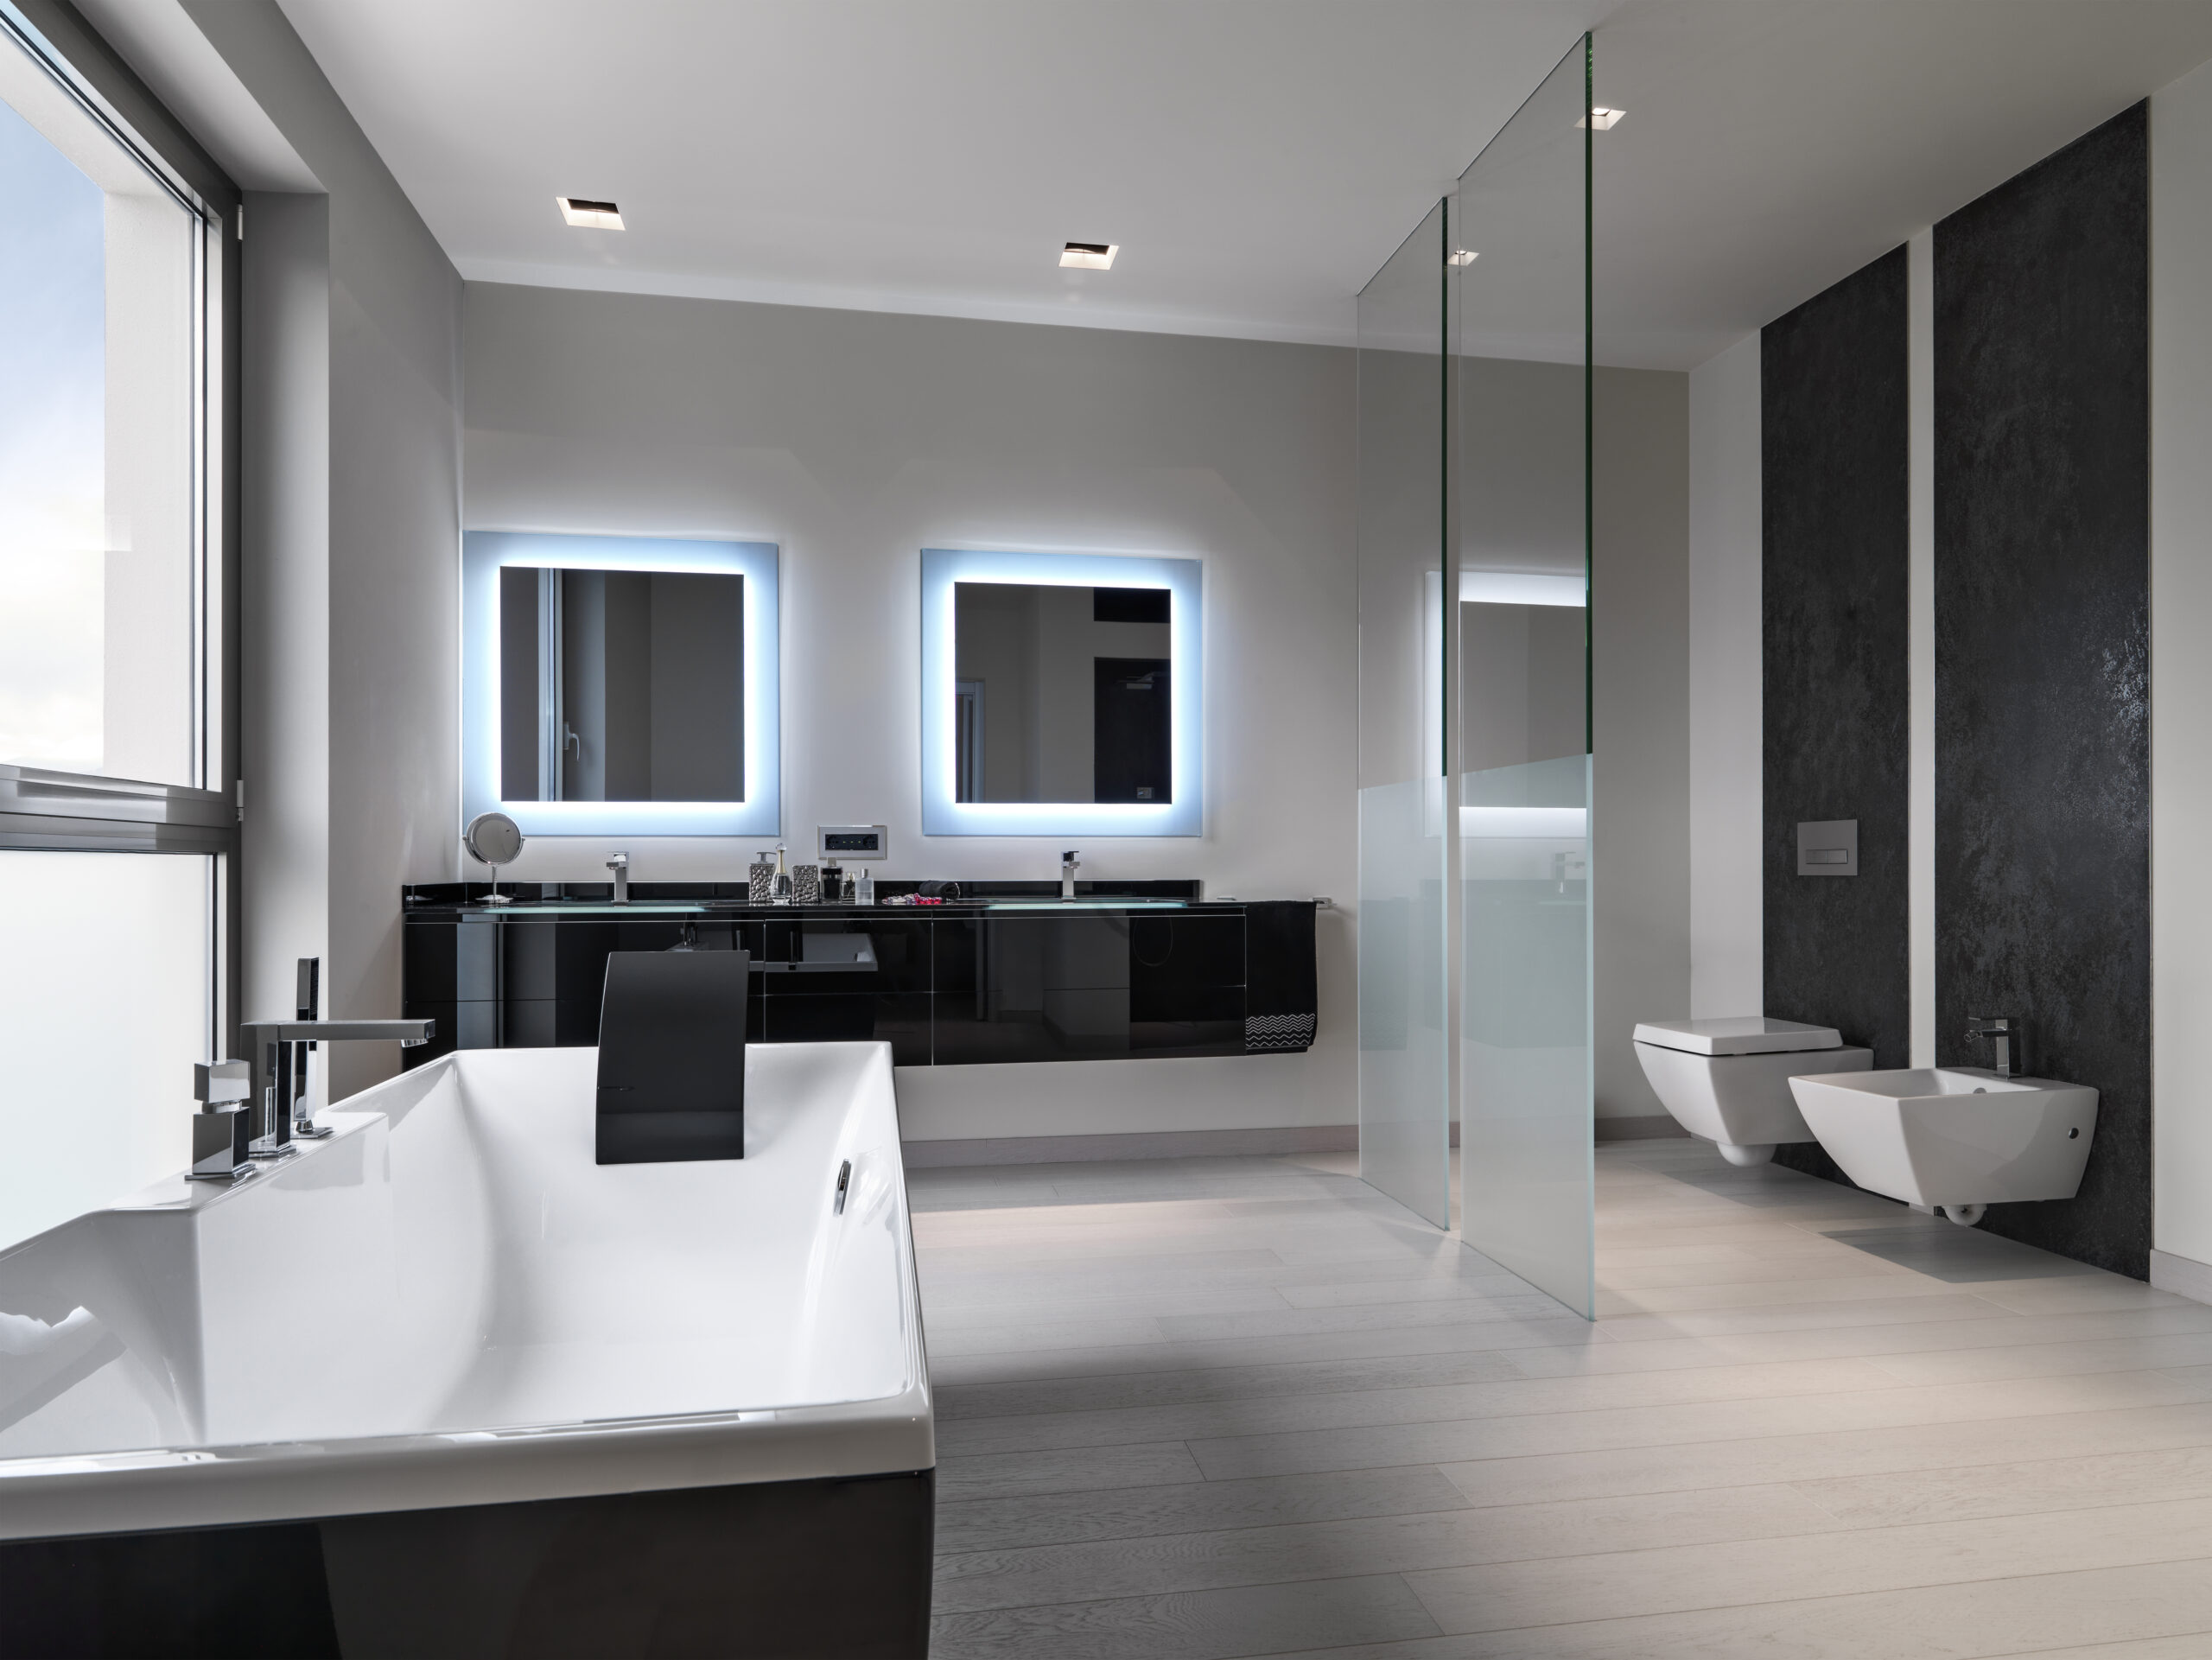 interiors shots of a modern bathroom in the foreground the bathtub in the background the washbasin furniture and the toilet bowl and bidetand